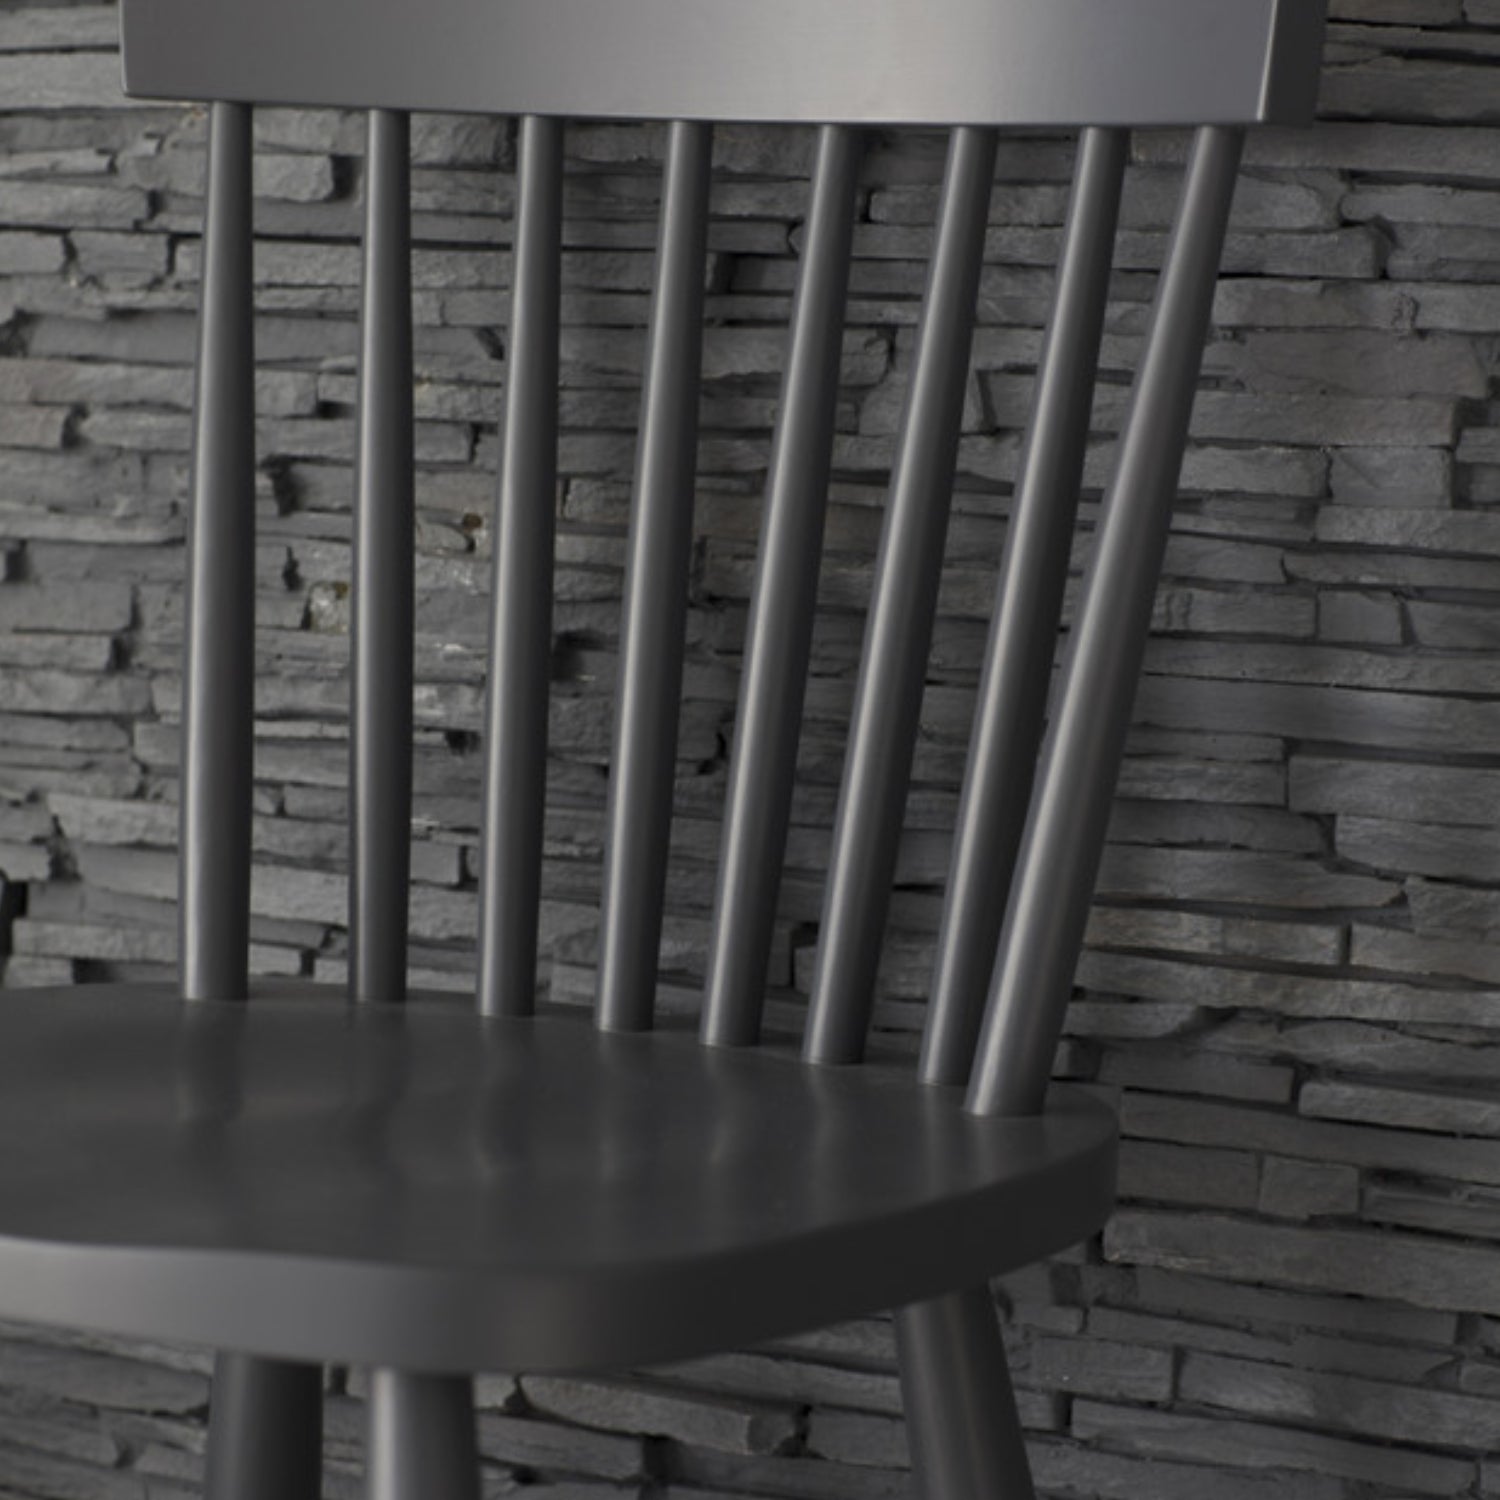 Spindle Bar Stool in Carbon by Garden Trading - Beech